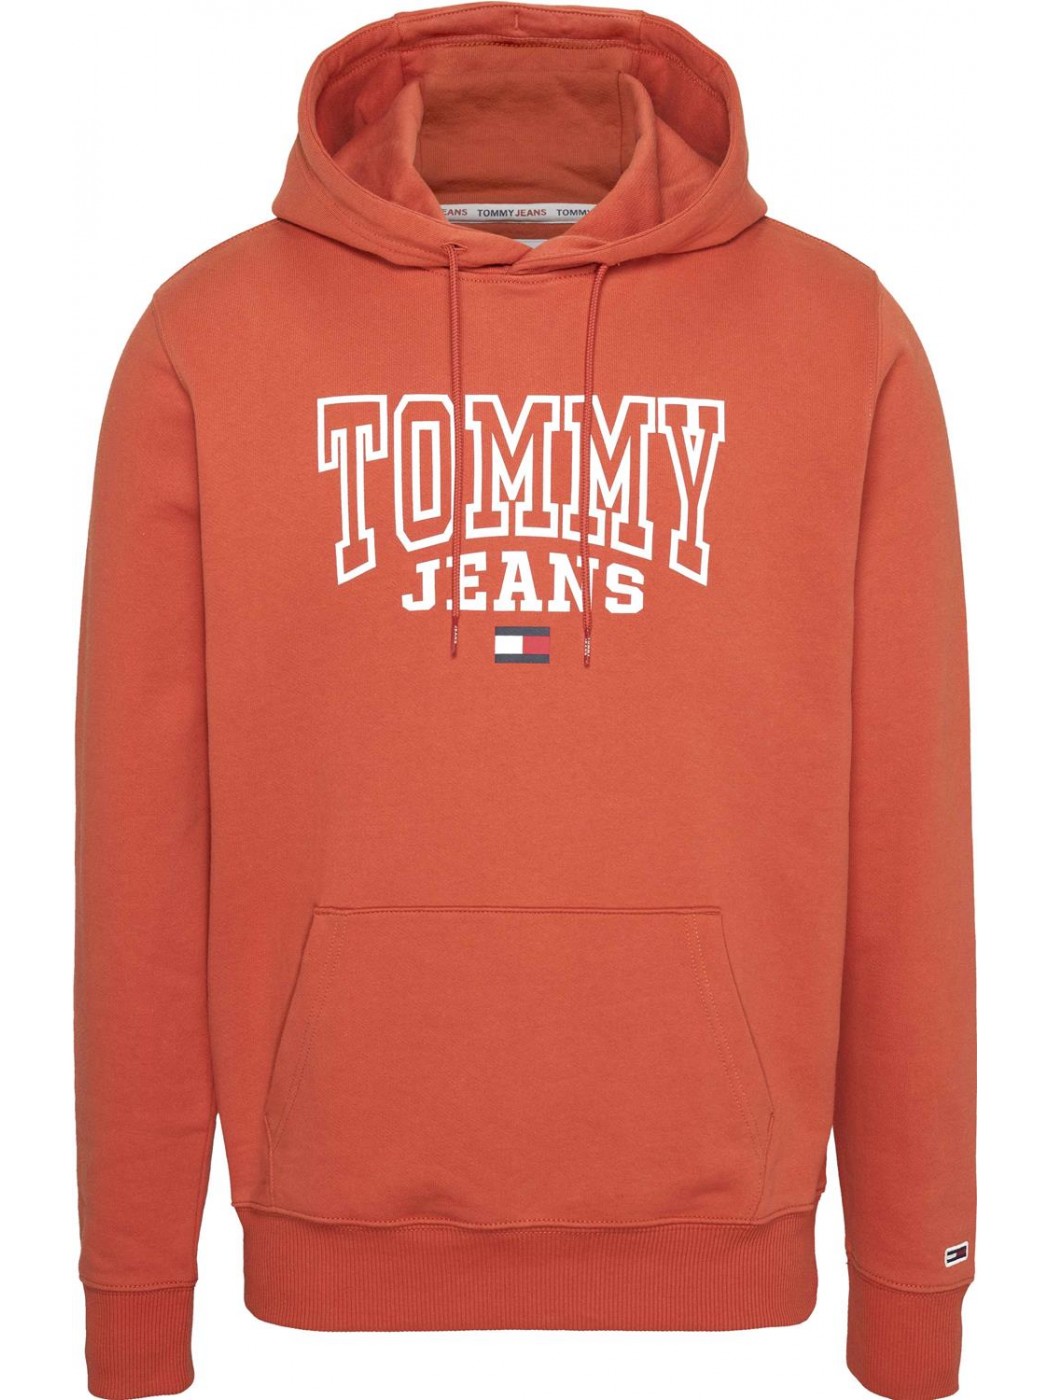 SUDADERA TOMMY JEANS HOMBRE...